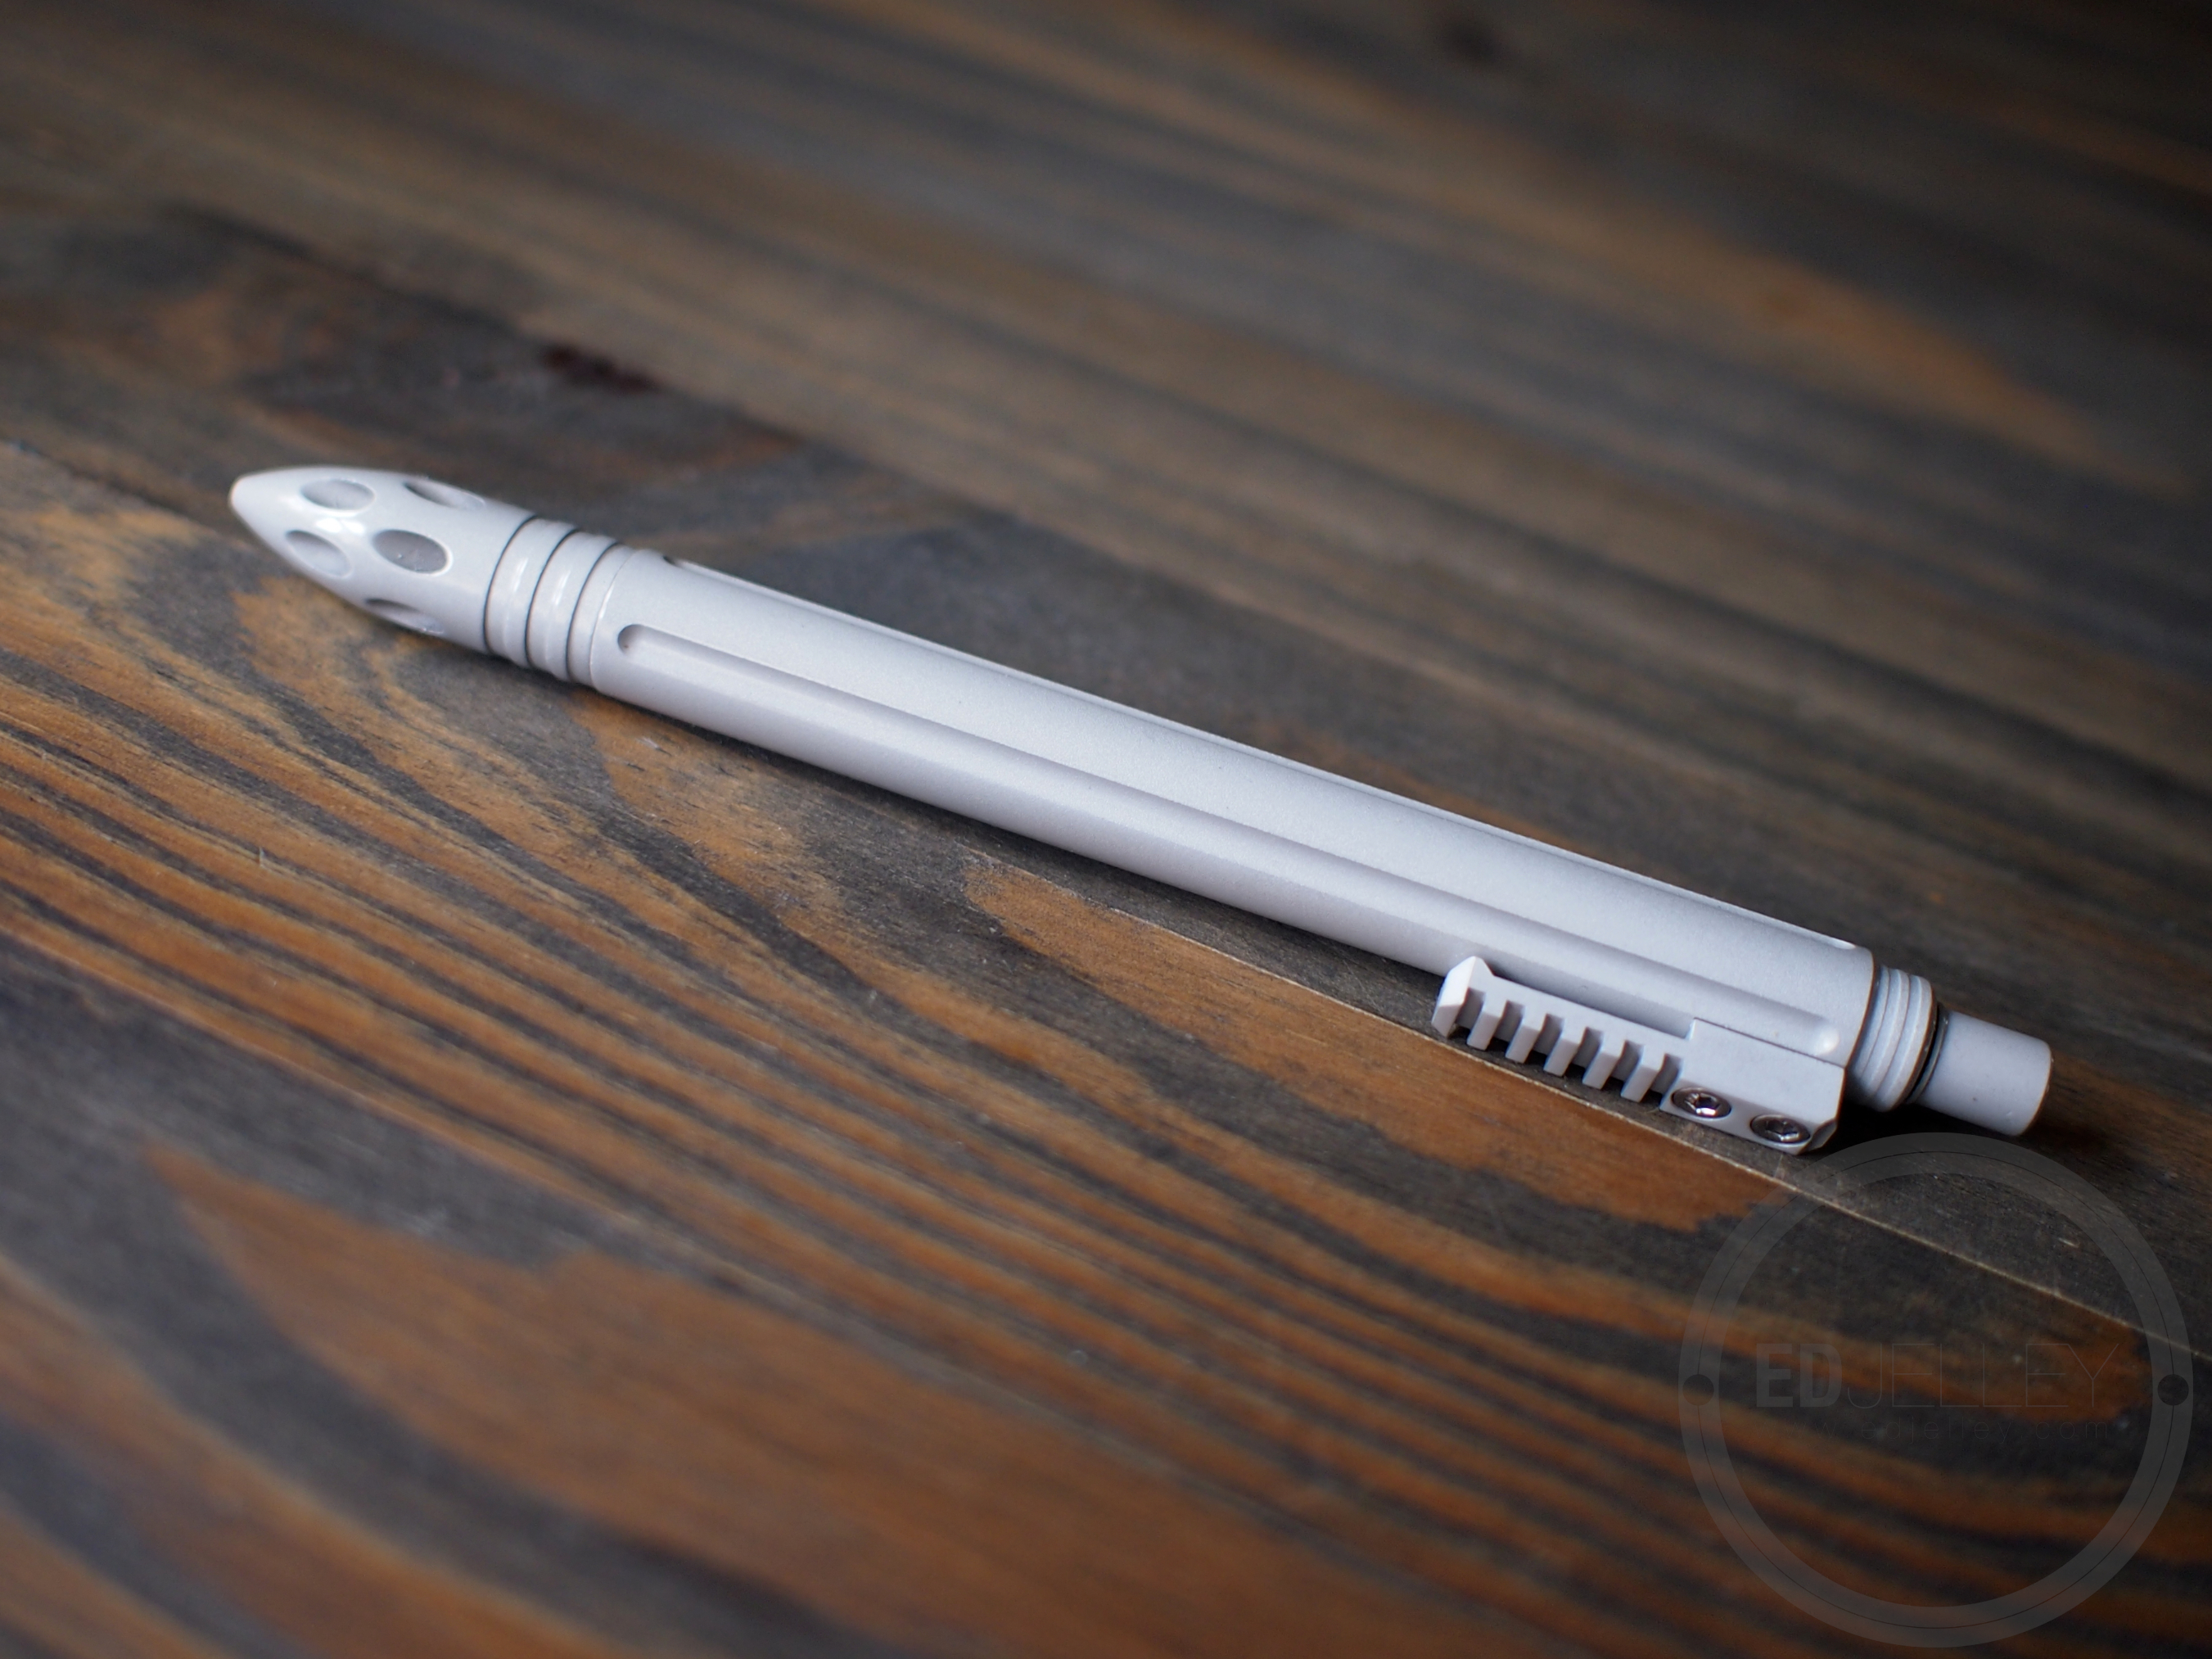 Stryker Tactial Pen with Anti-Microbial Coating – Hands-On and
Kickstarter Launch